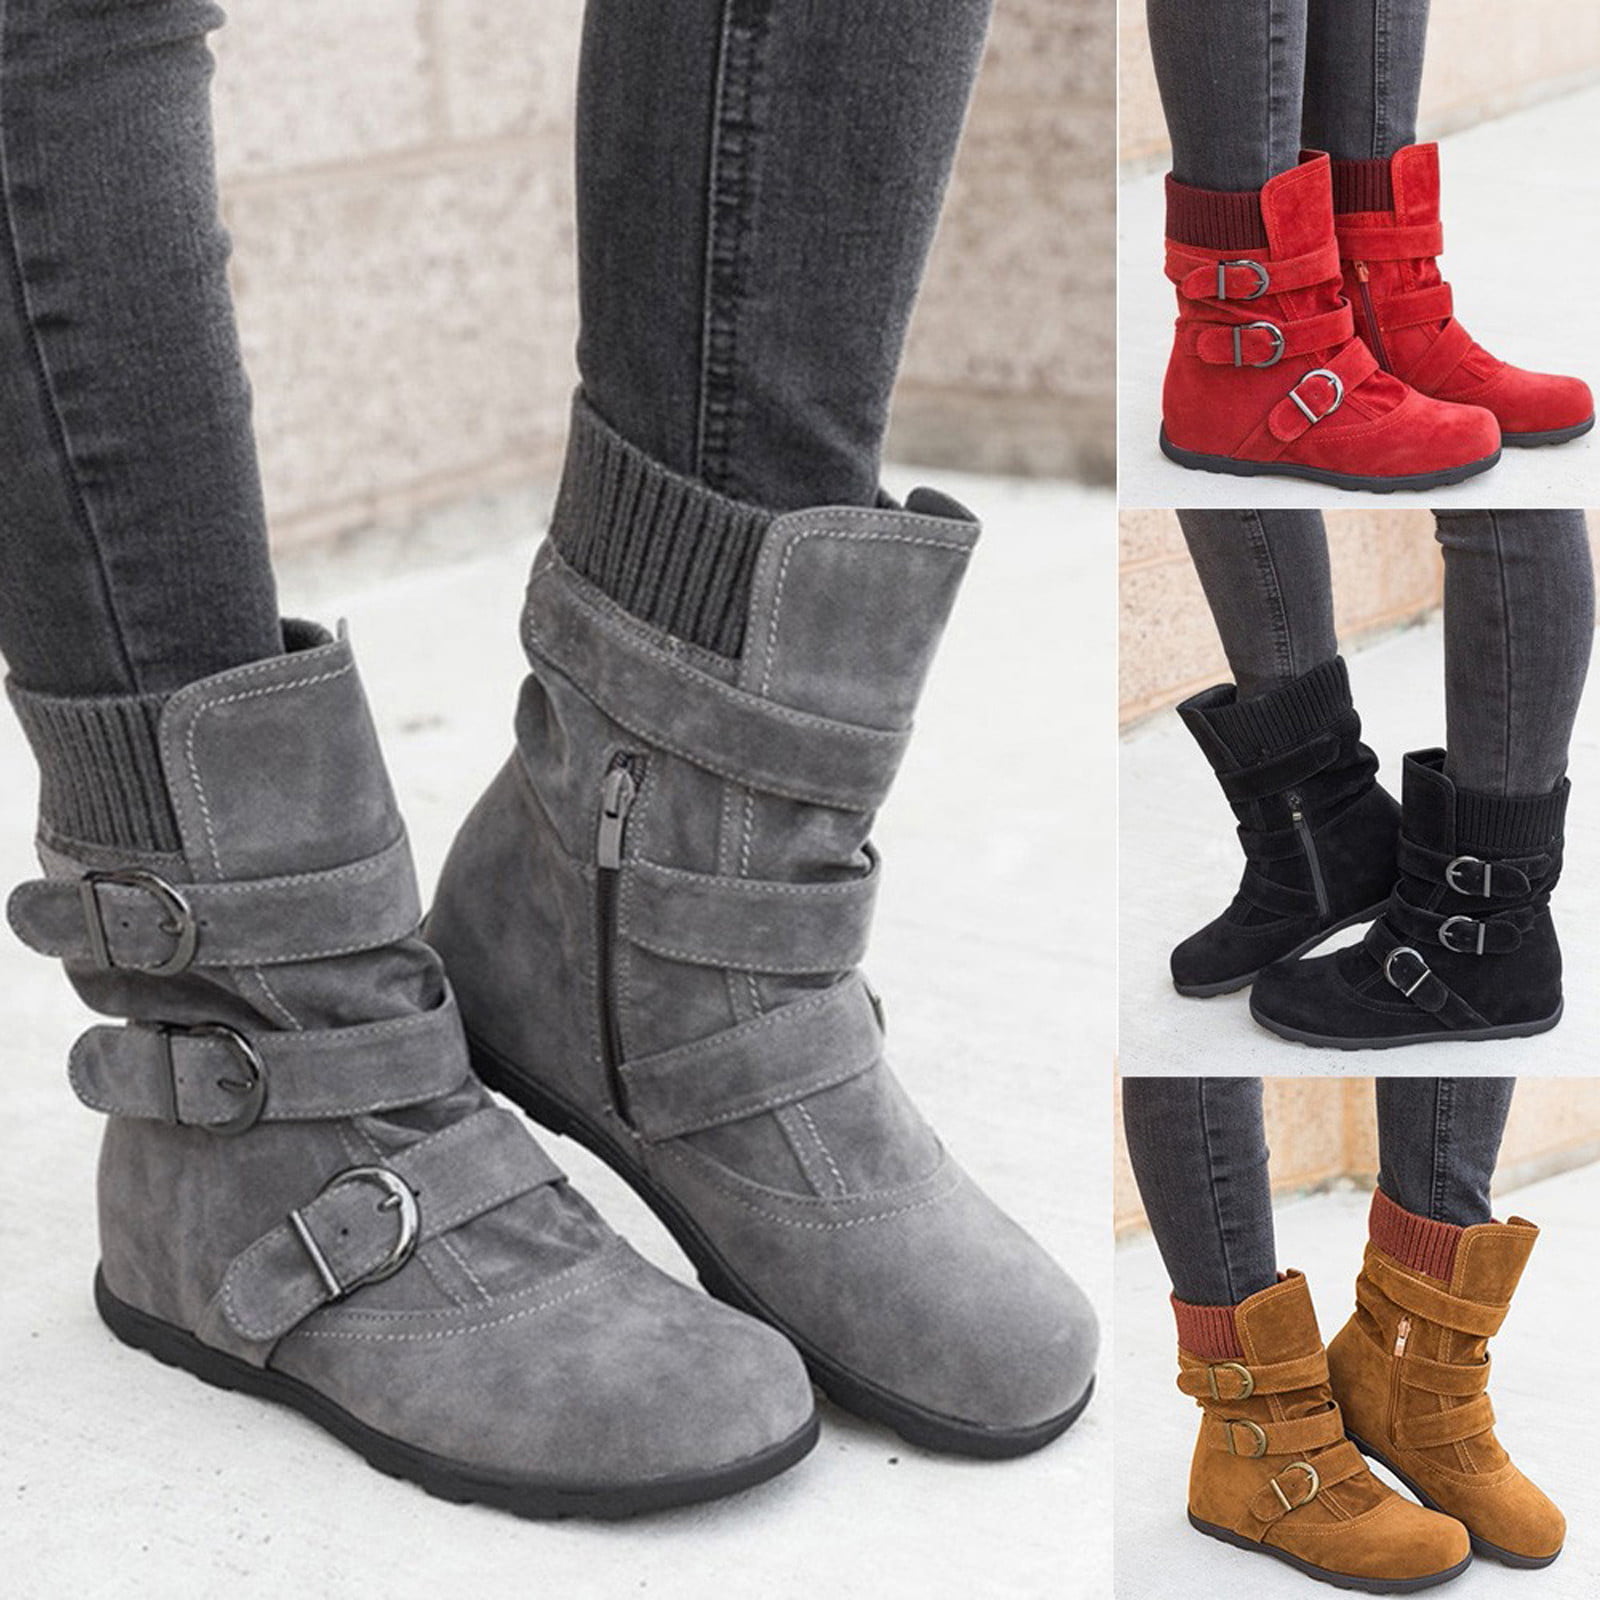 Womens Faux Suede Heart Floral Warm Flat Snow Winter Shoes Ankle Boots Round Toe 